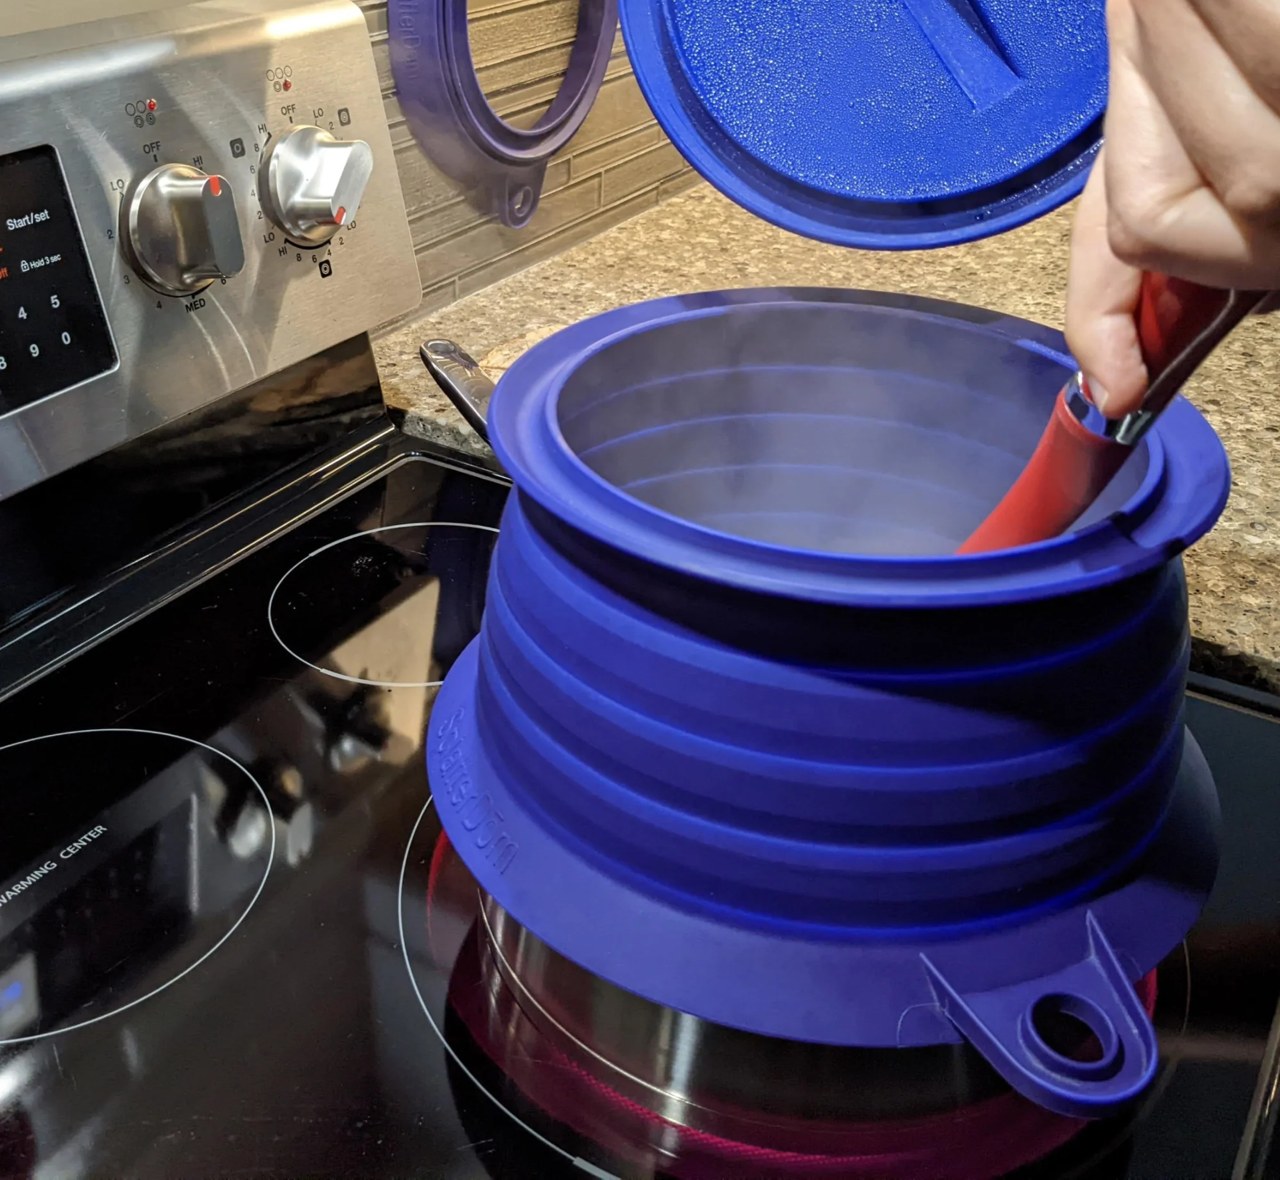 https://www.yankodesign.com/images/design_news/2023/07/this-versatile-kitchen-aid-will-help-you-cook-great-meals-without-the-mess/silicone_enclosure_creates_a_splatter-proof_wall_to_keep_your_kitchen_clean_11.jpg